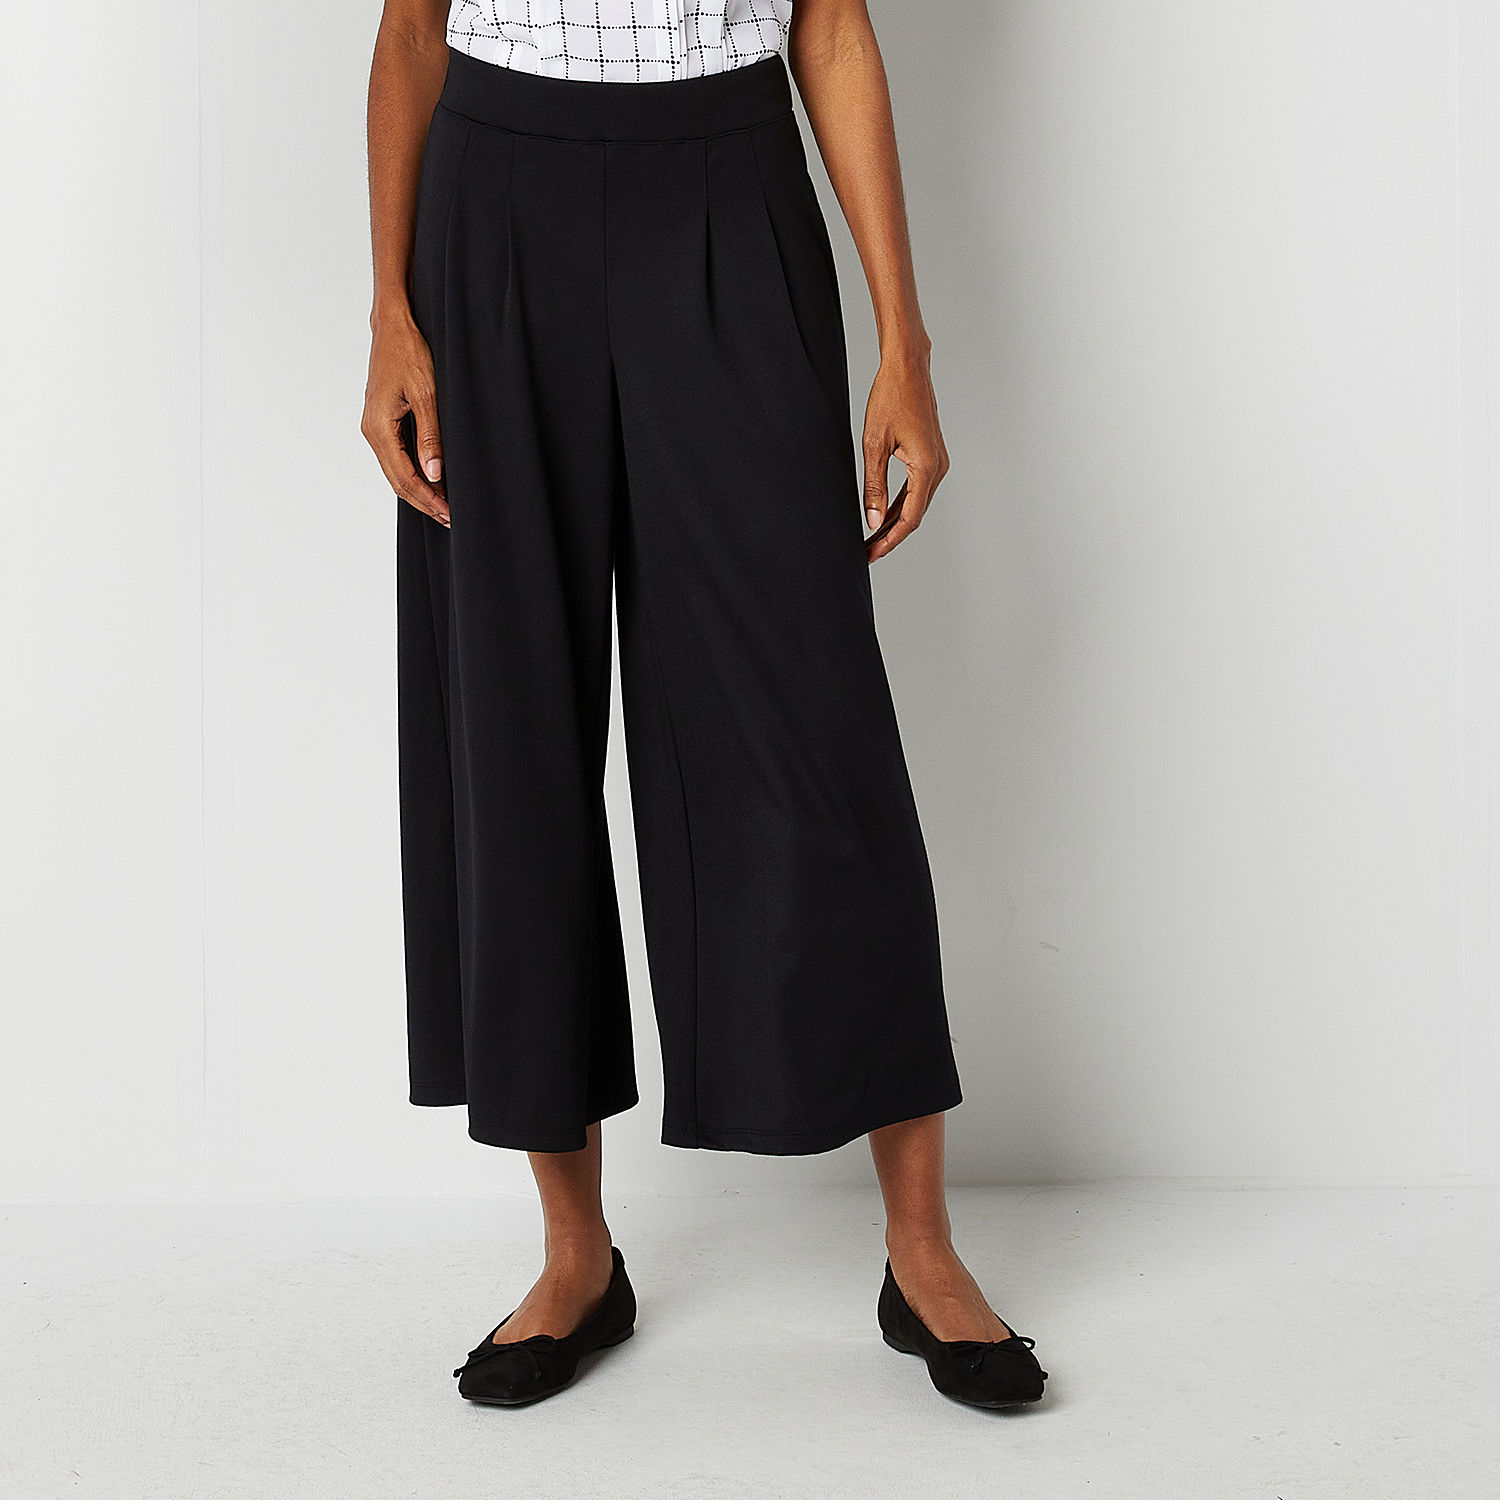 Liz Claiborne Womens Wide Leg Pull-On Pants - JCPenney